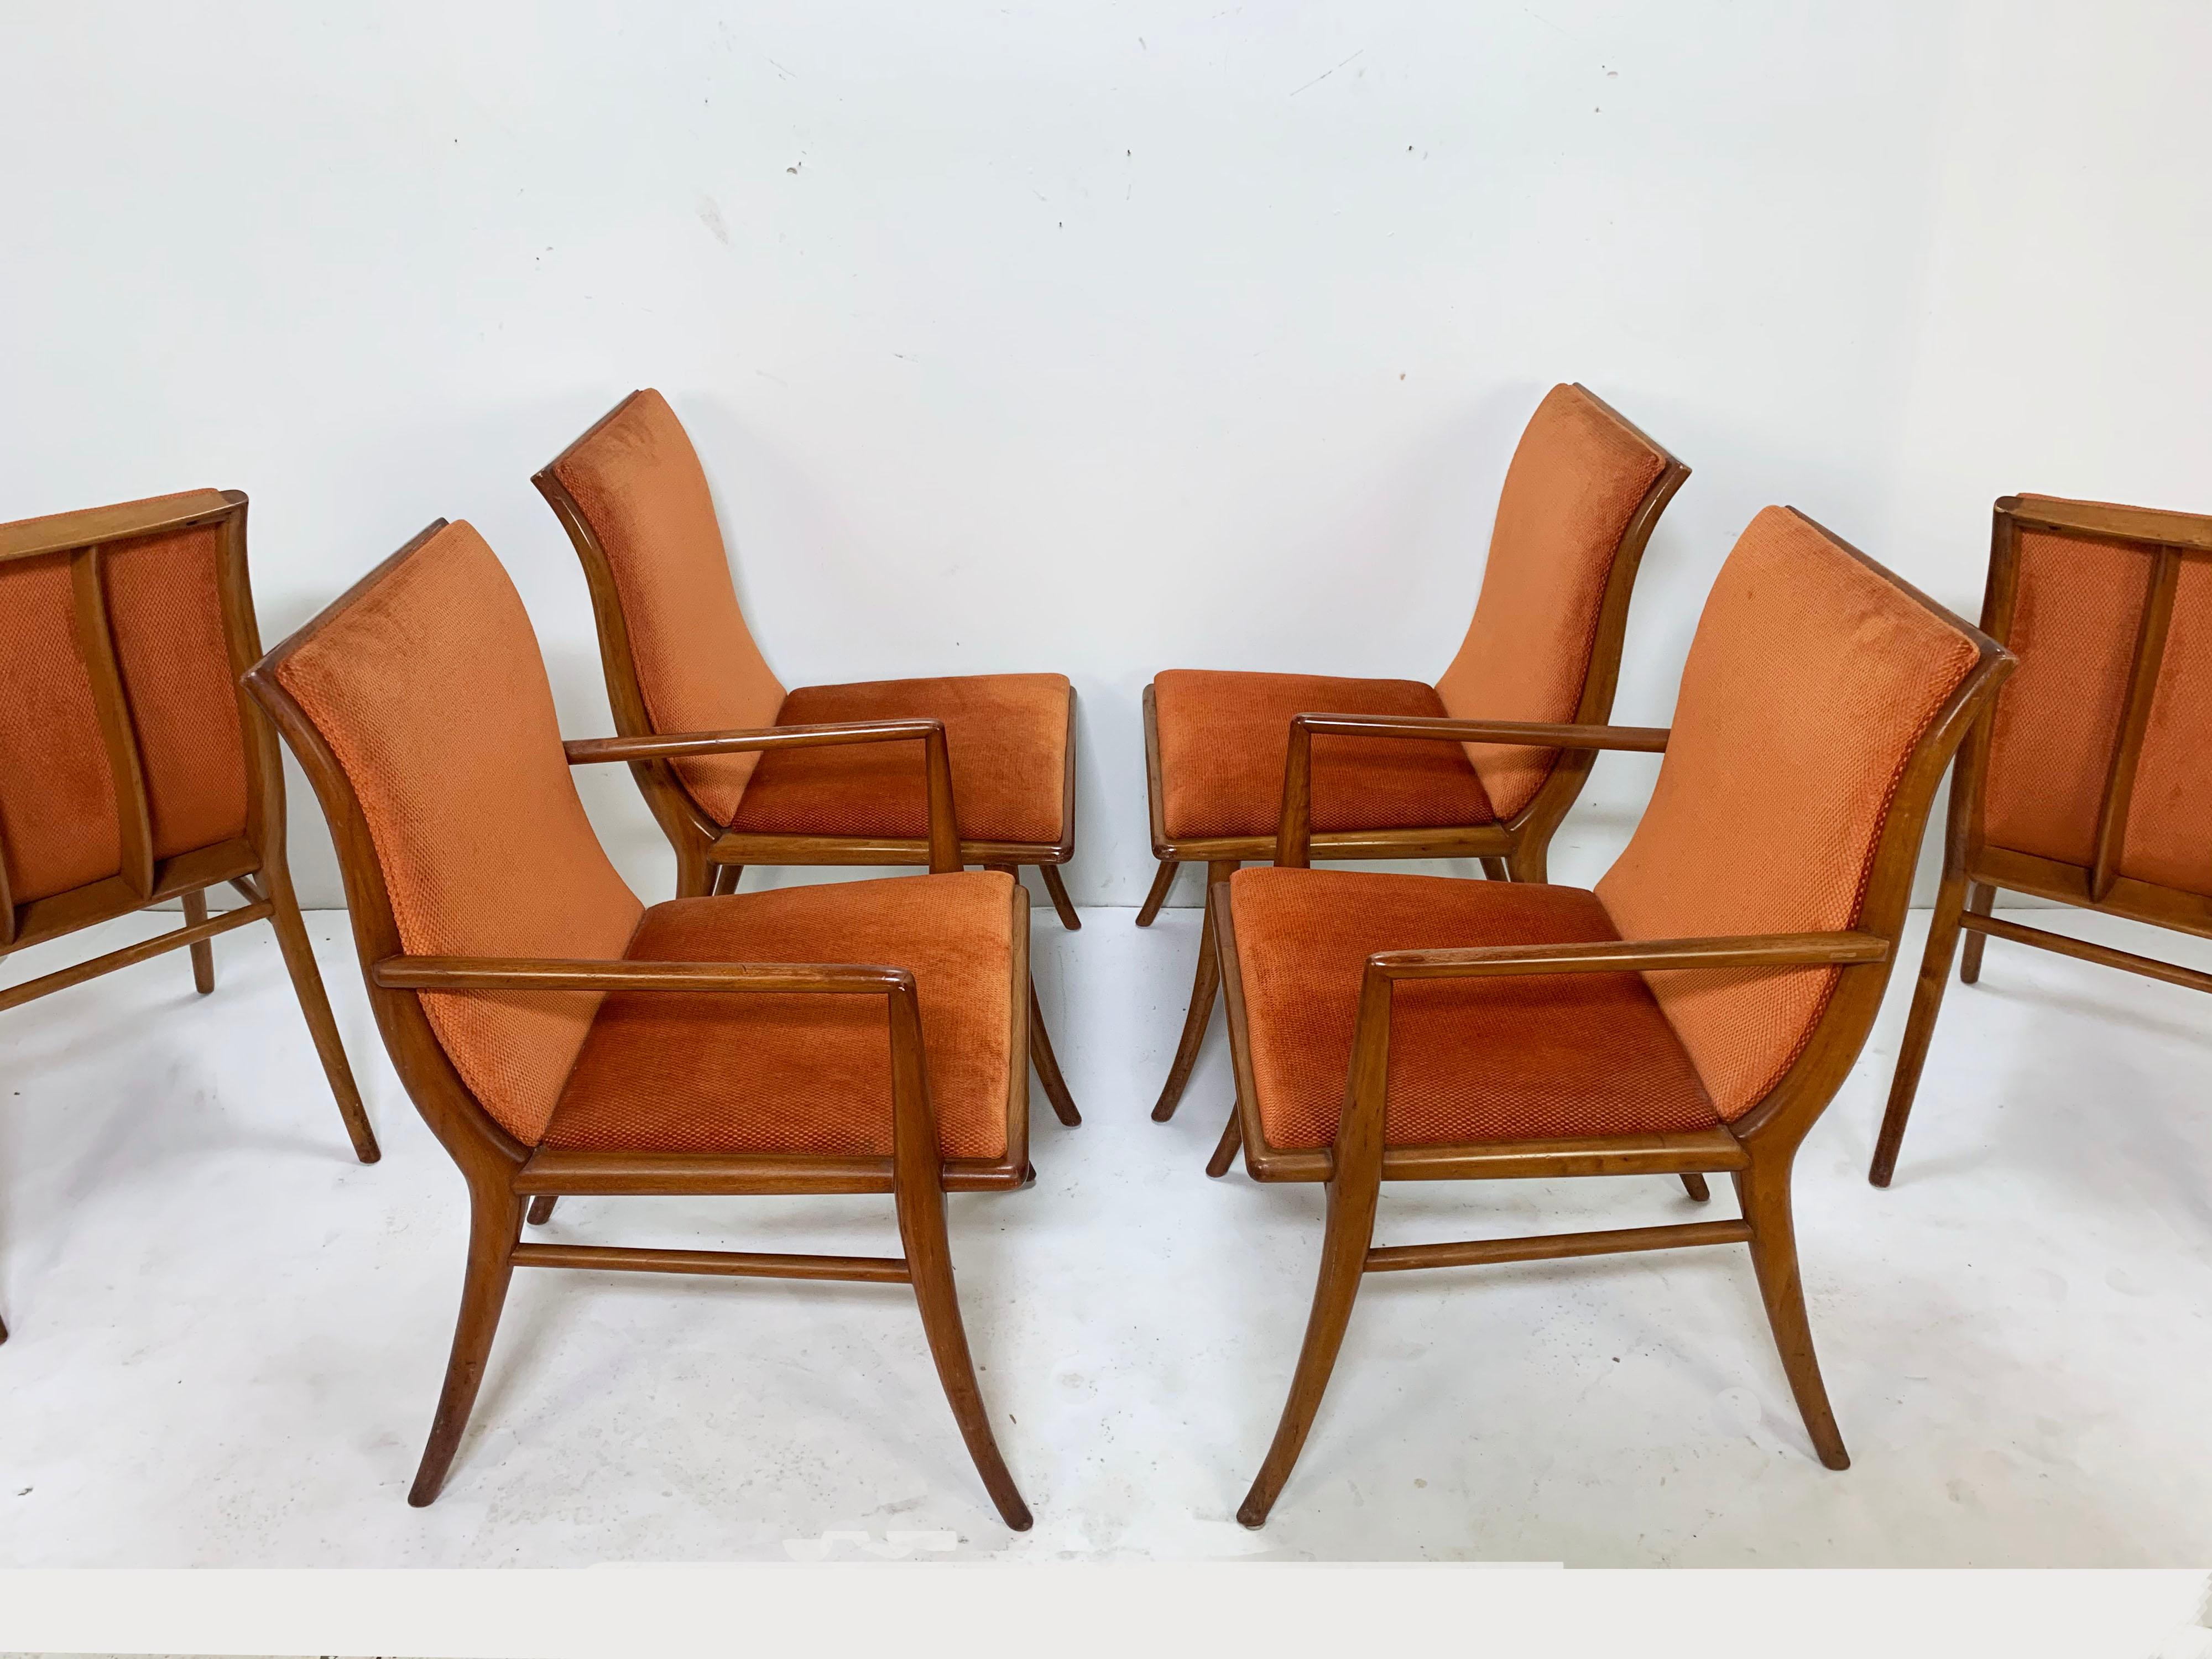 A set of six saber leg dining chairs in walnut with upholstered seats and backs, two arm and four sides, model no. 4204, designed by T.H. Robsjohn Gibbings for Widdicomb, circa late 1940s.

Armchairs measure 22.5” wide x 24” deep x 33.5” high,